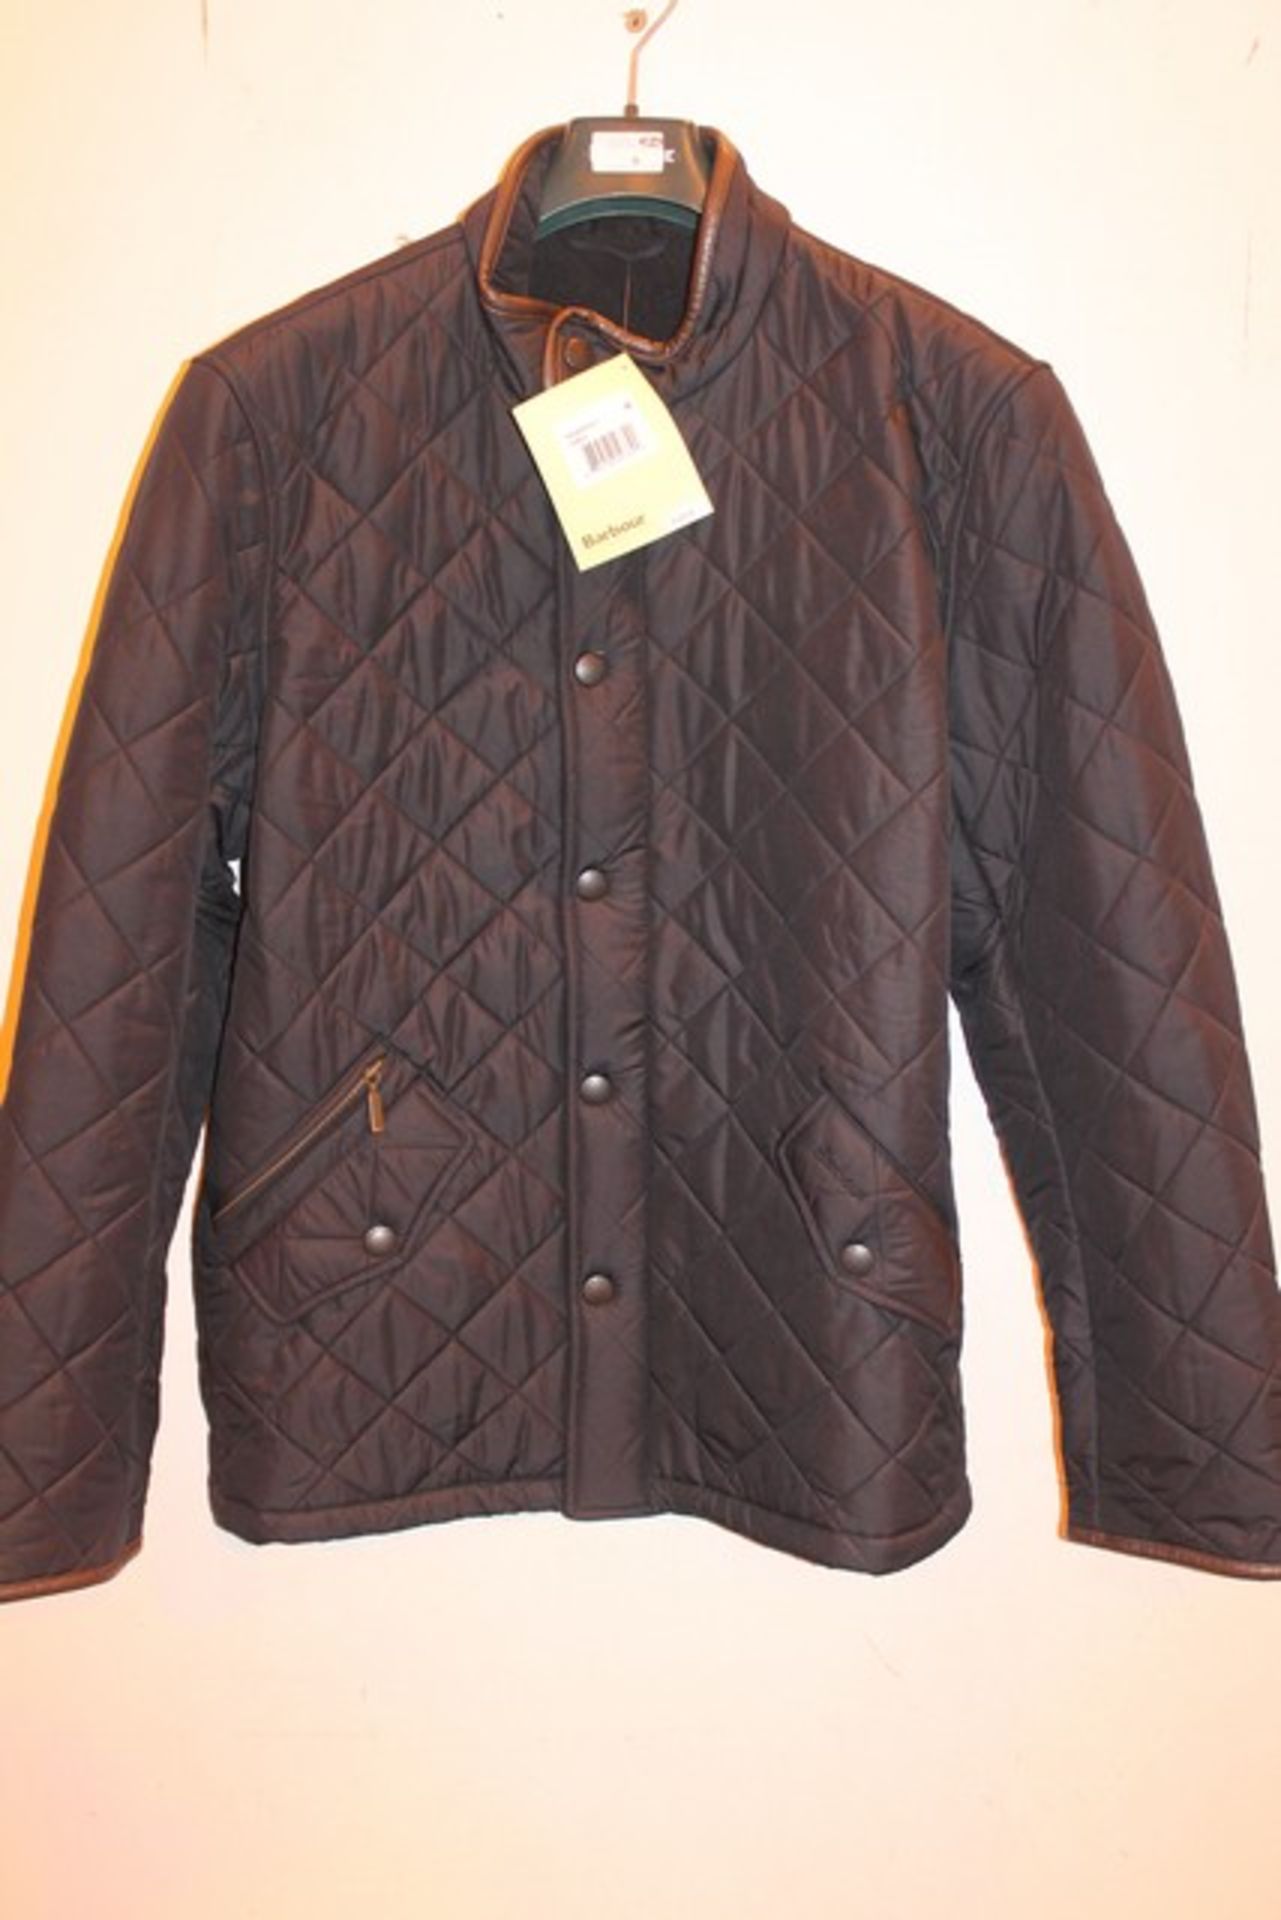 1 x BARBOUR SIZE MEDIUM POWELL QUILTED MENS JACKET RRP £150 (CAGE 12.008)   *PLEASE NOTE THAT THE